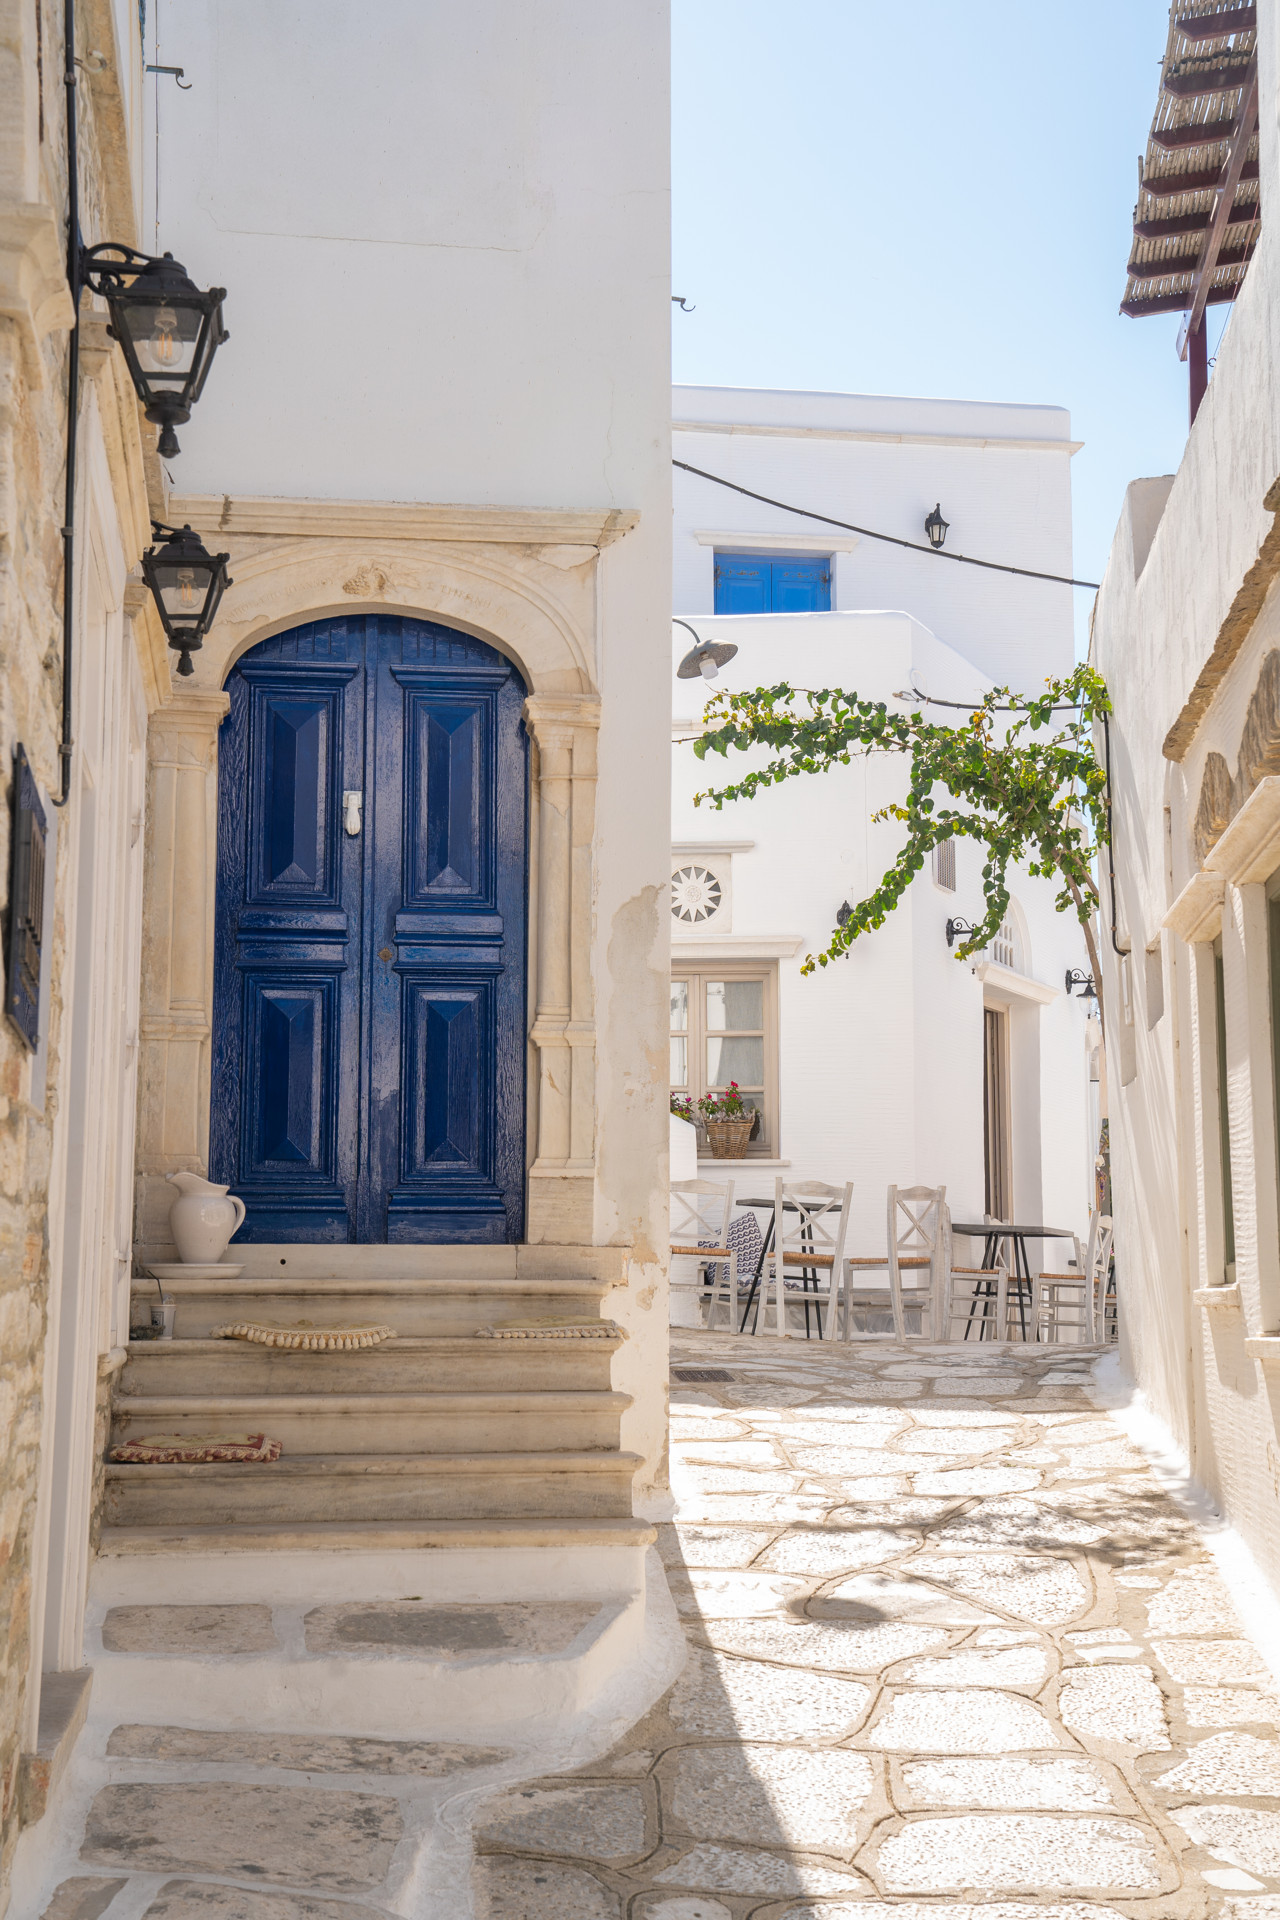 Once you’ve explored the alleyways of Pyrgos, head to the main square for a local delicacy 